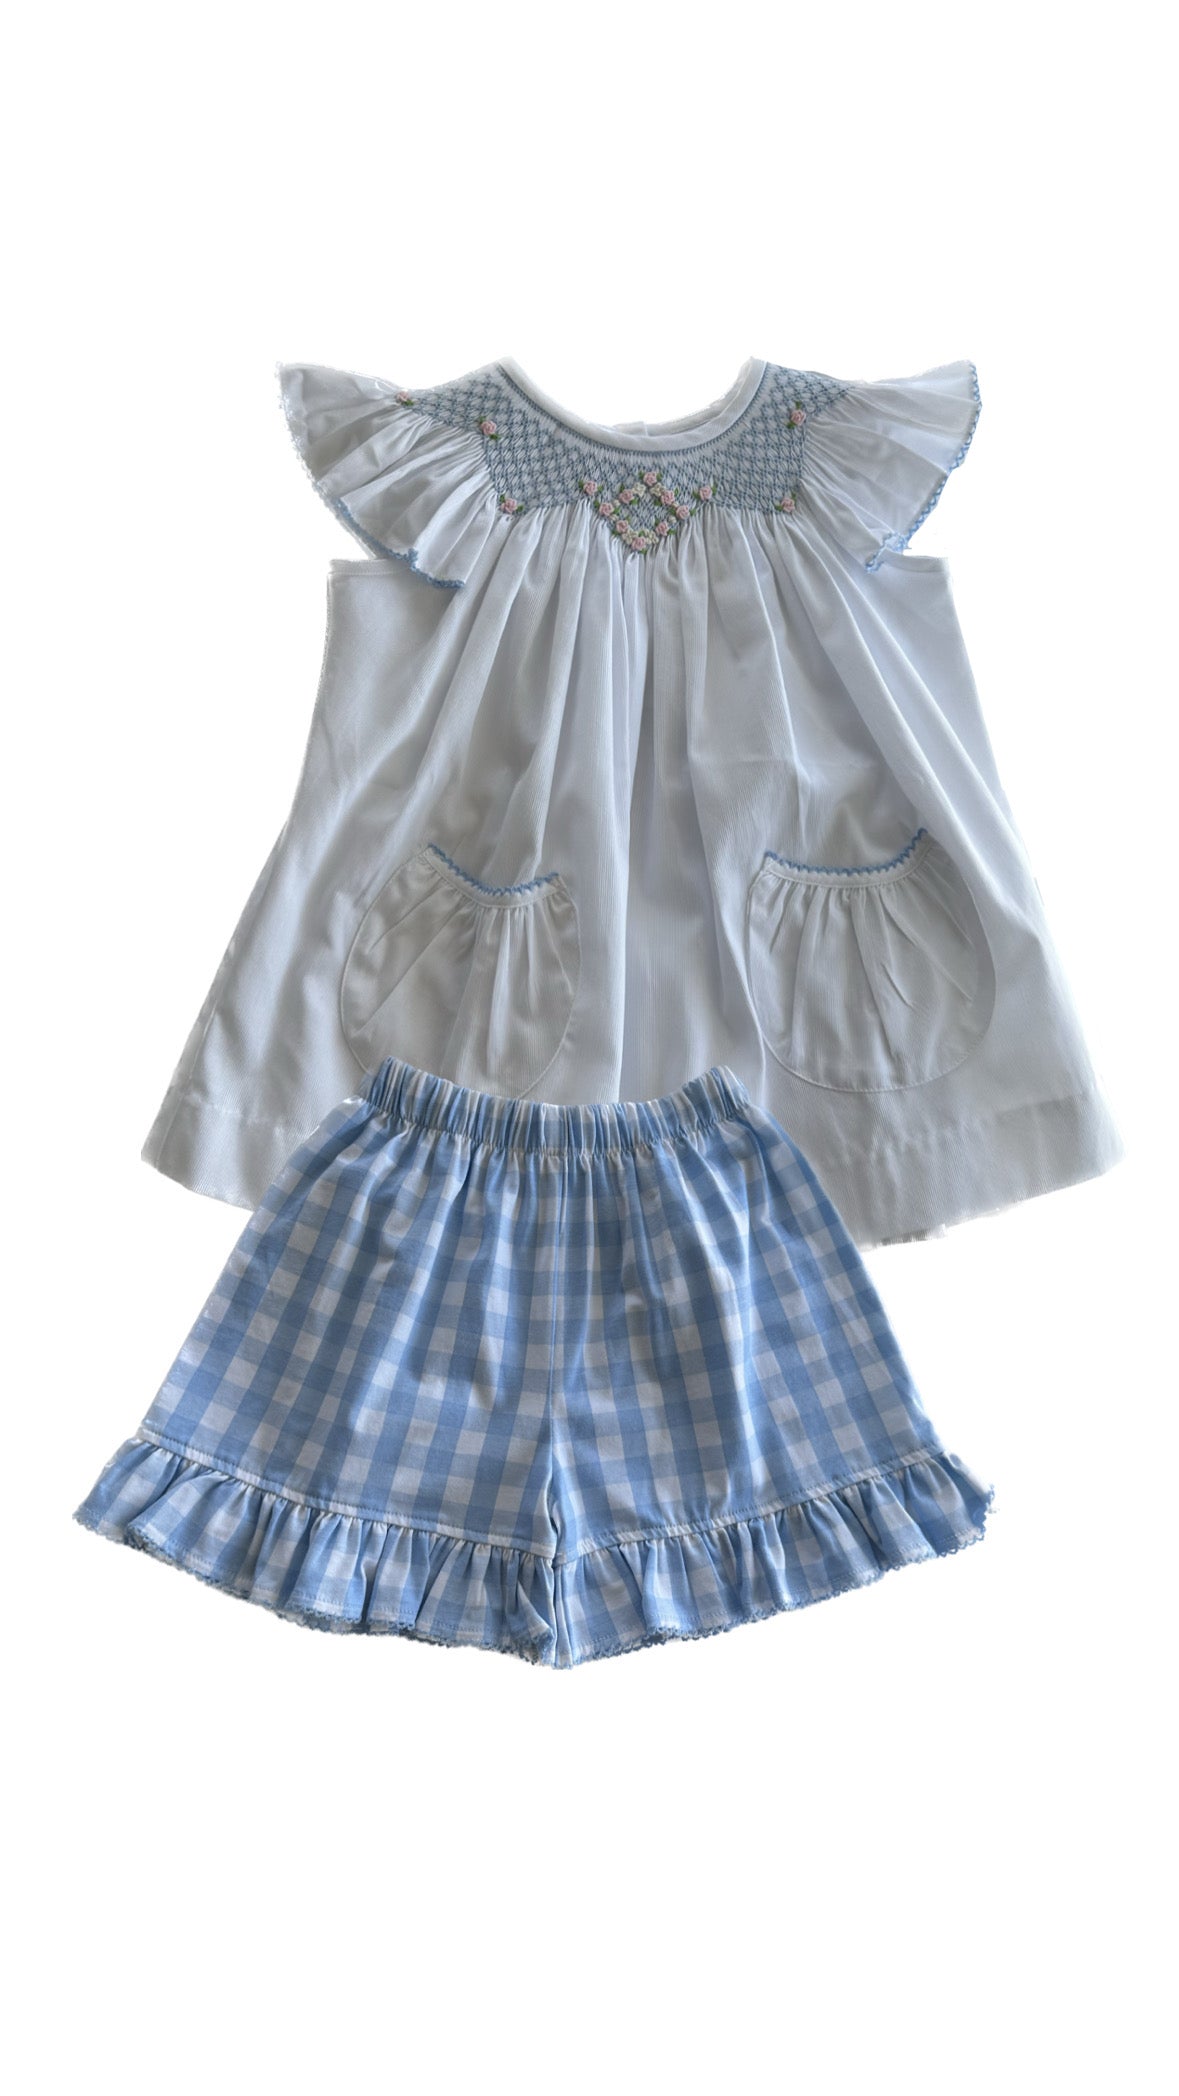 Delaney Smocked Top and Shorts